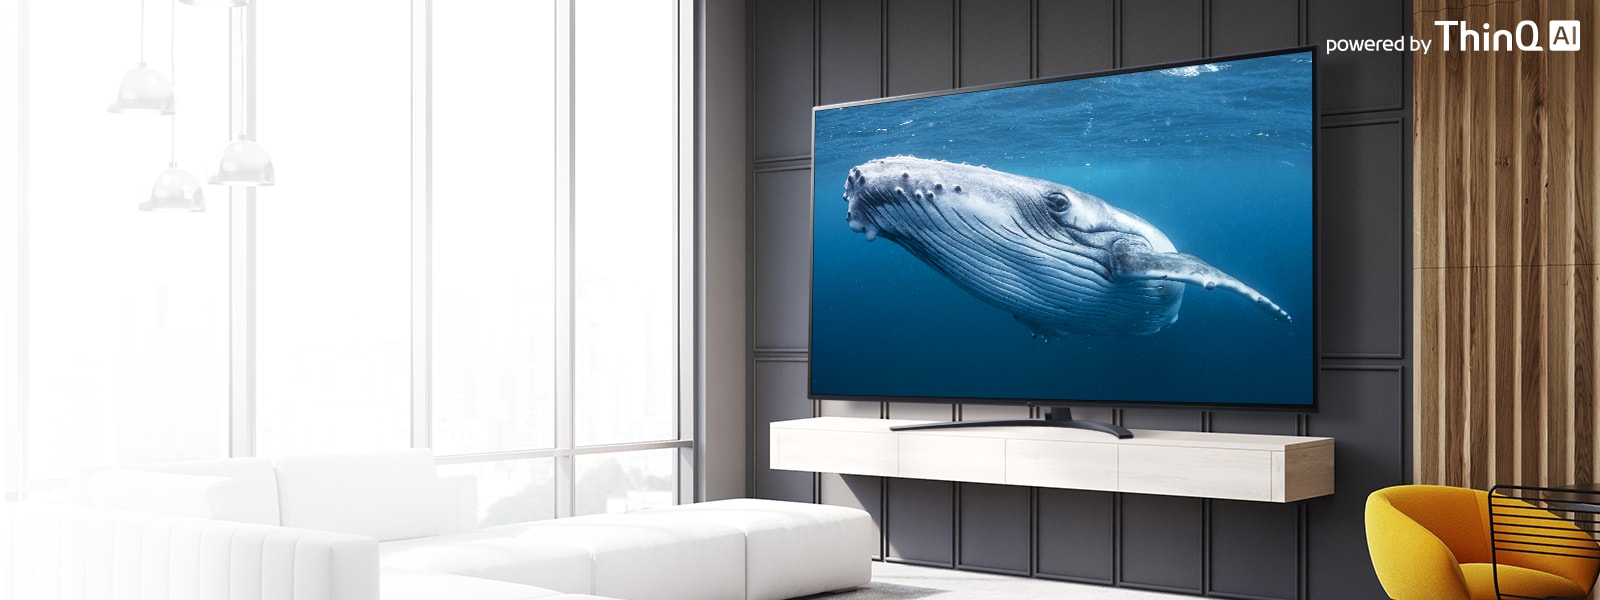 In a living room, there is a large screen TV displaying an image of a big whale in the sea. On the image, there is an introduction of a large screen TV on the left center and a powered by ThinQ AI logo on the upper right.